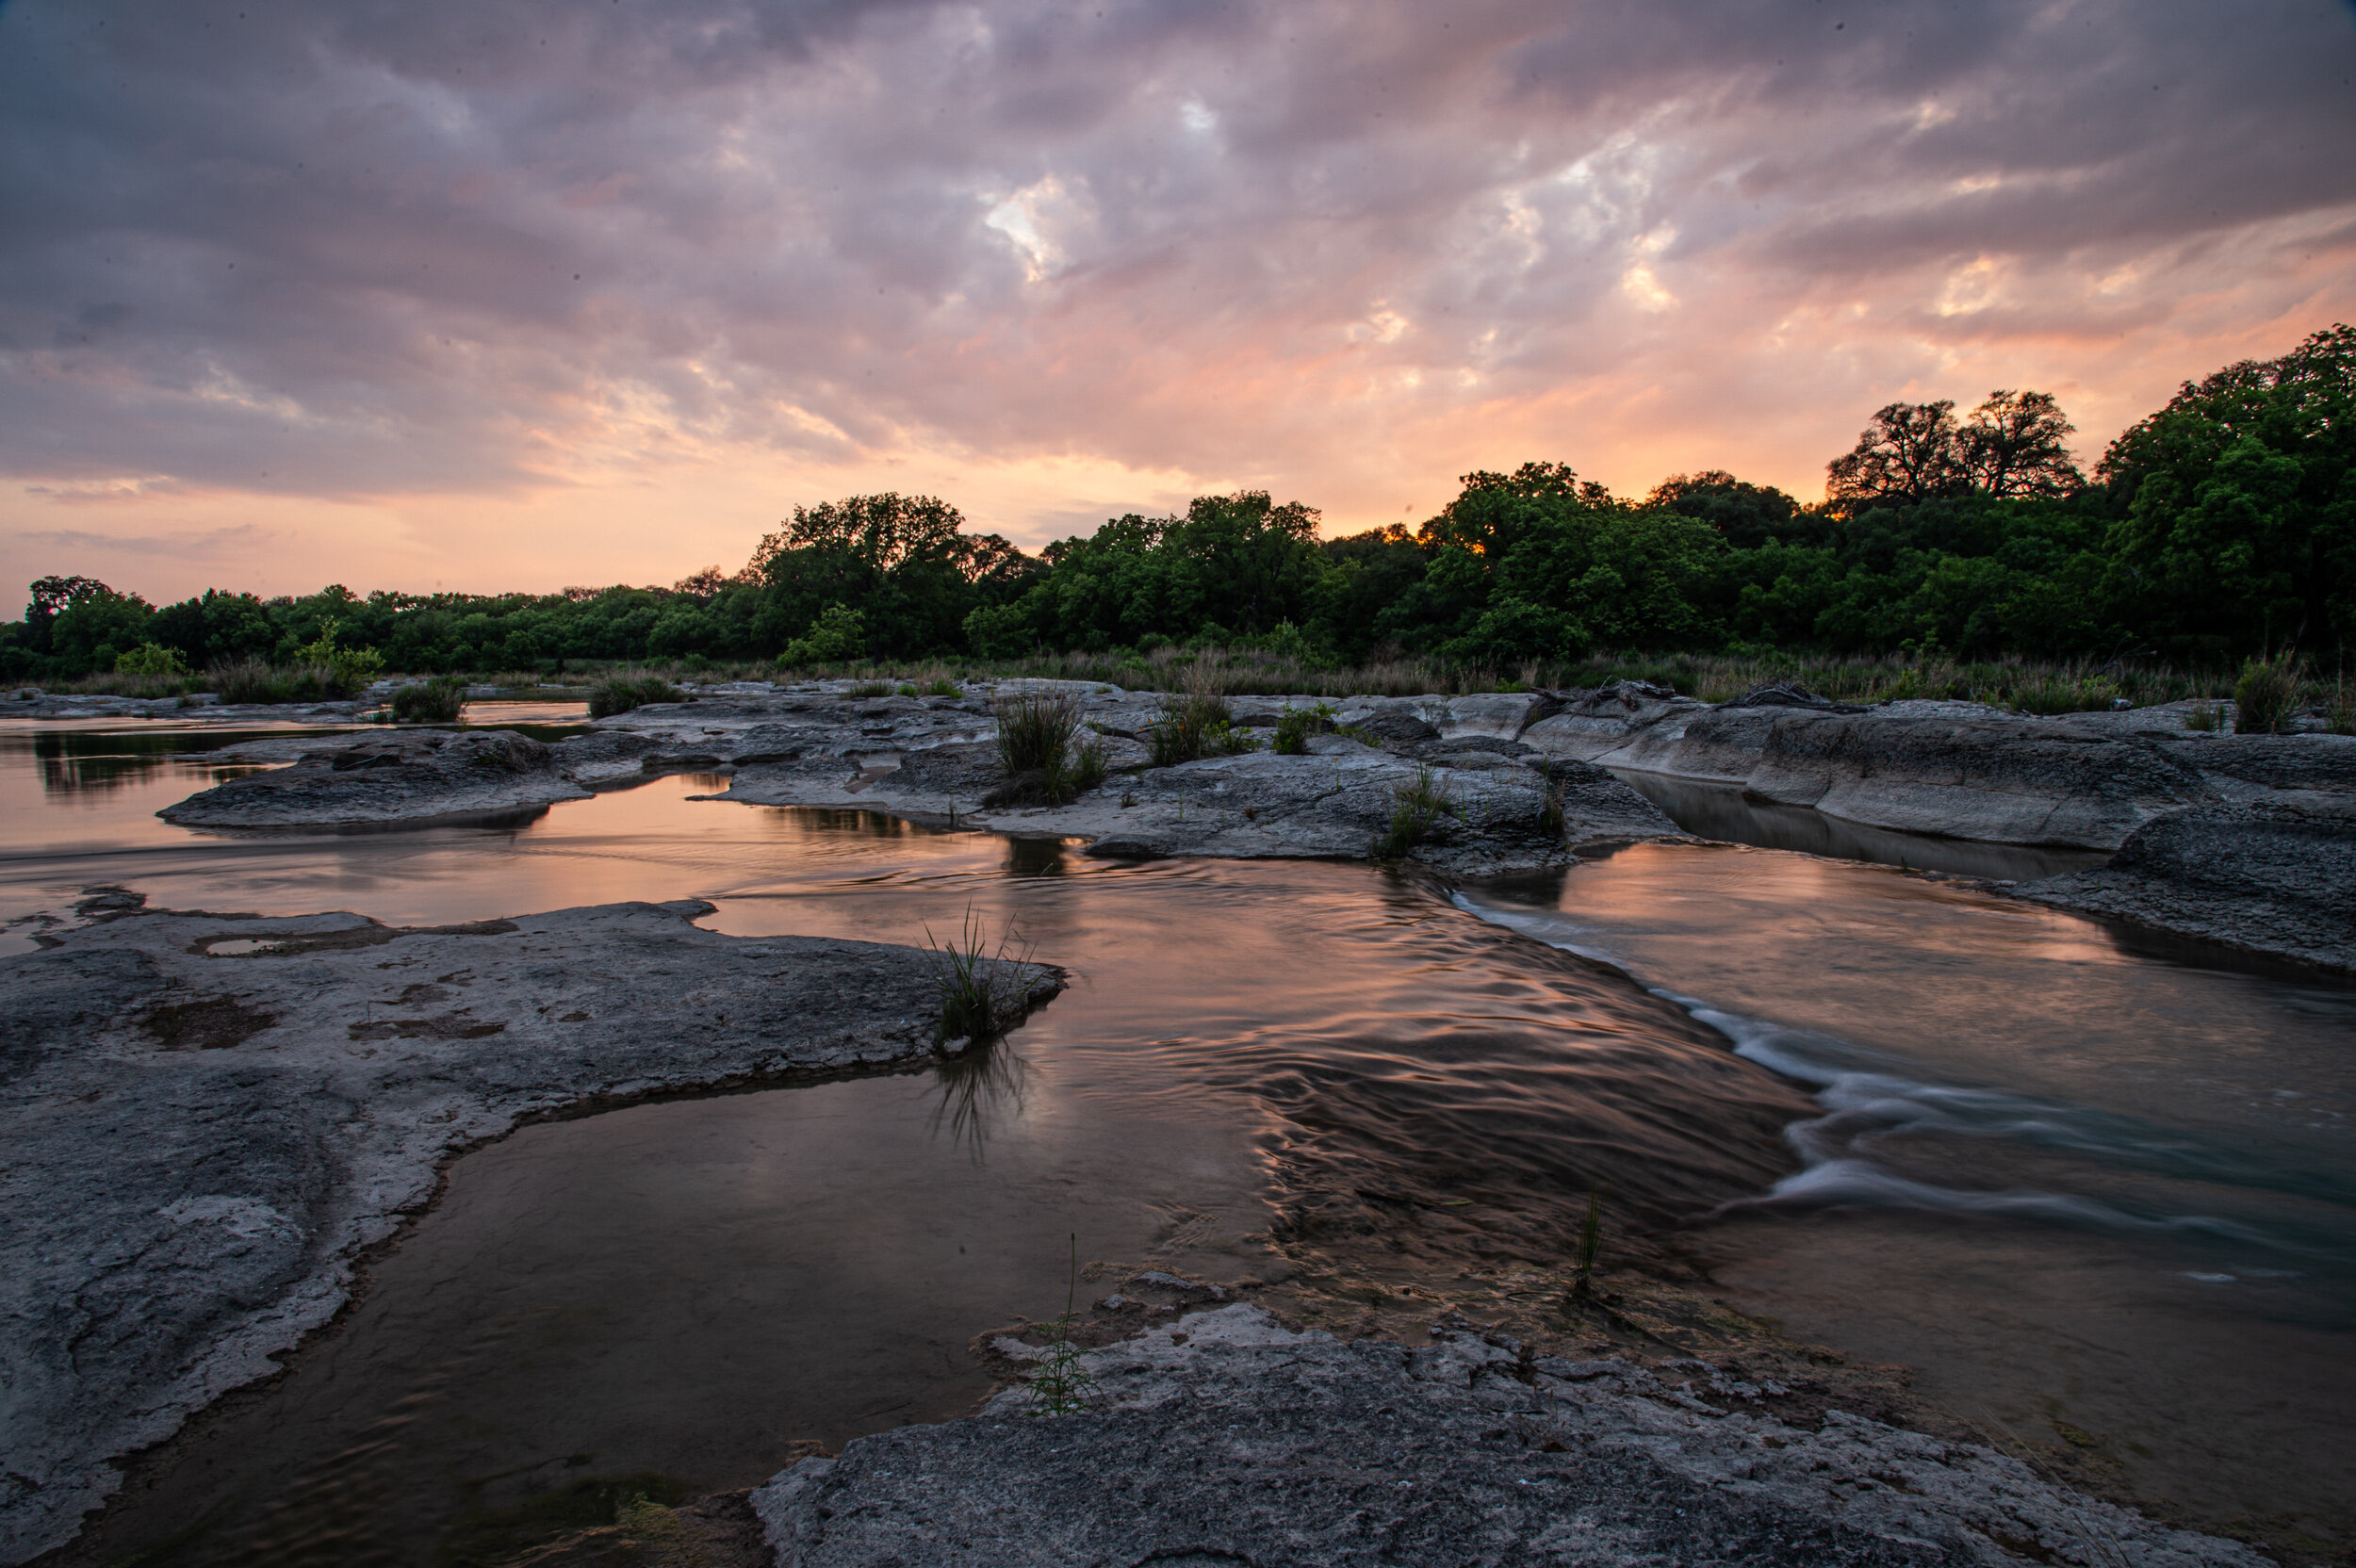  The Llano River runs through the Llano River Ranch at sunset on May 16, 2021, in Junction, Texas. 